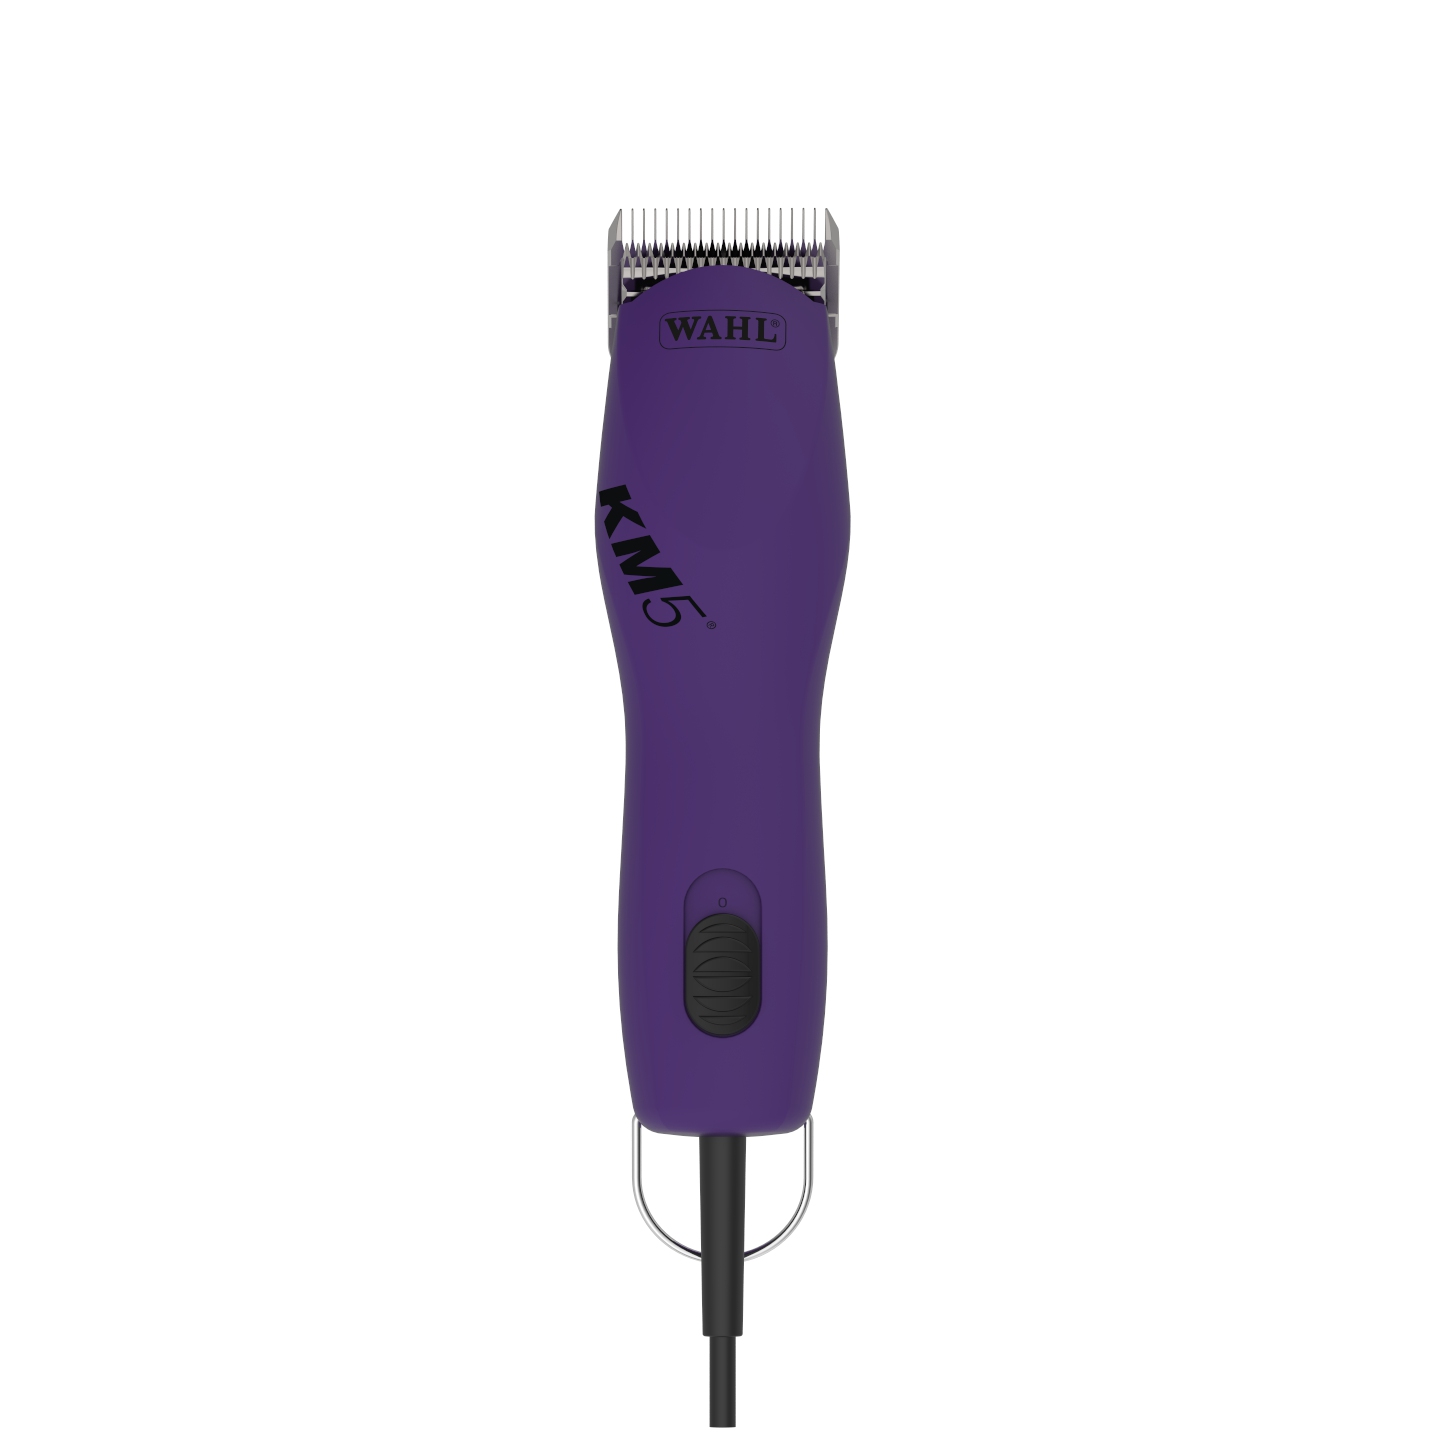 wahl km5 review